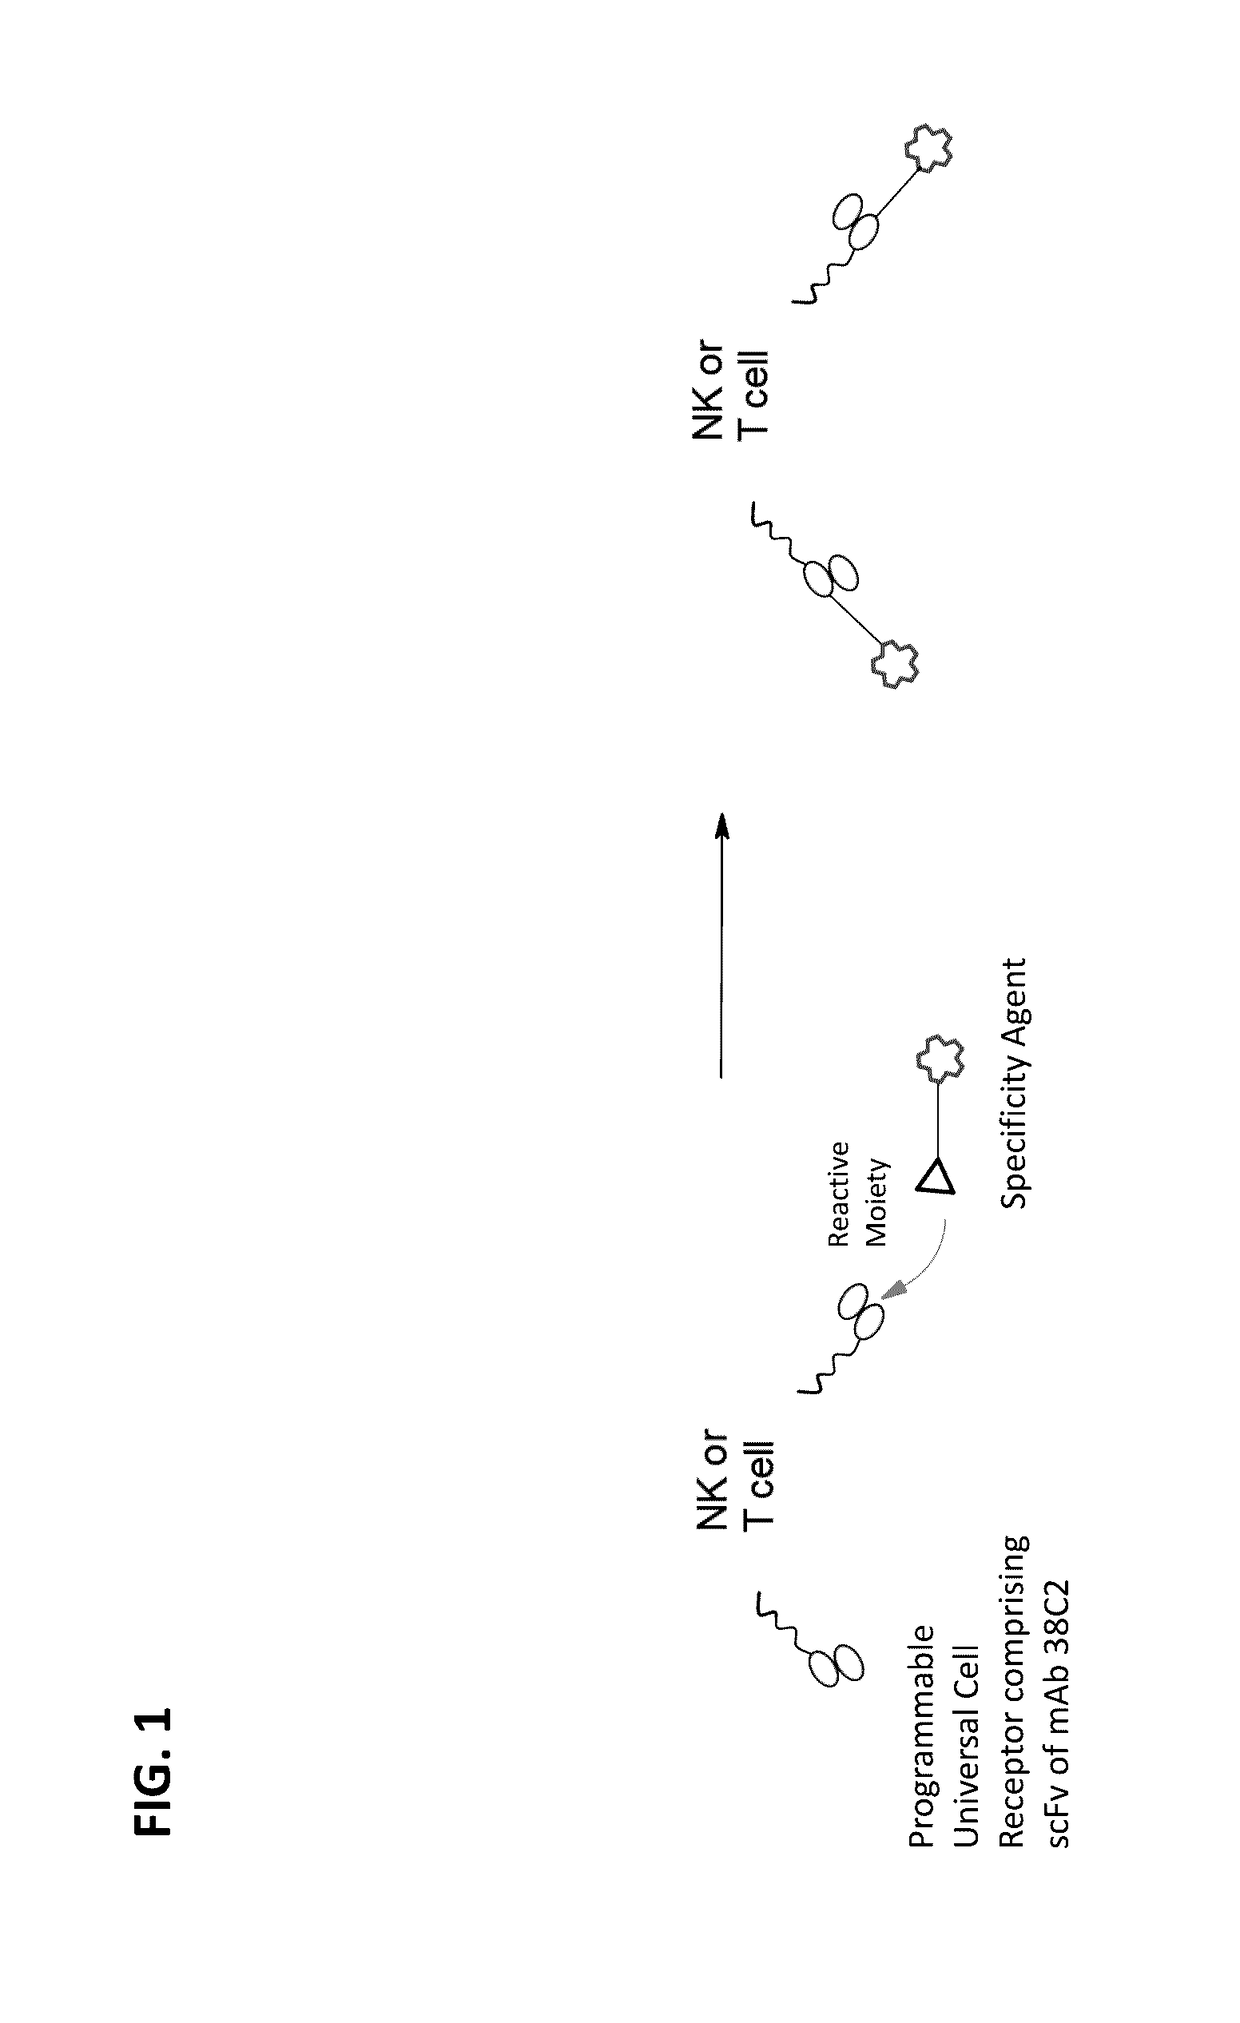 Programmable universal cell receptors and method of using the same